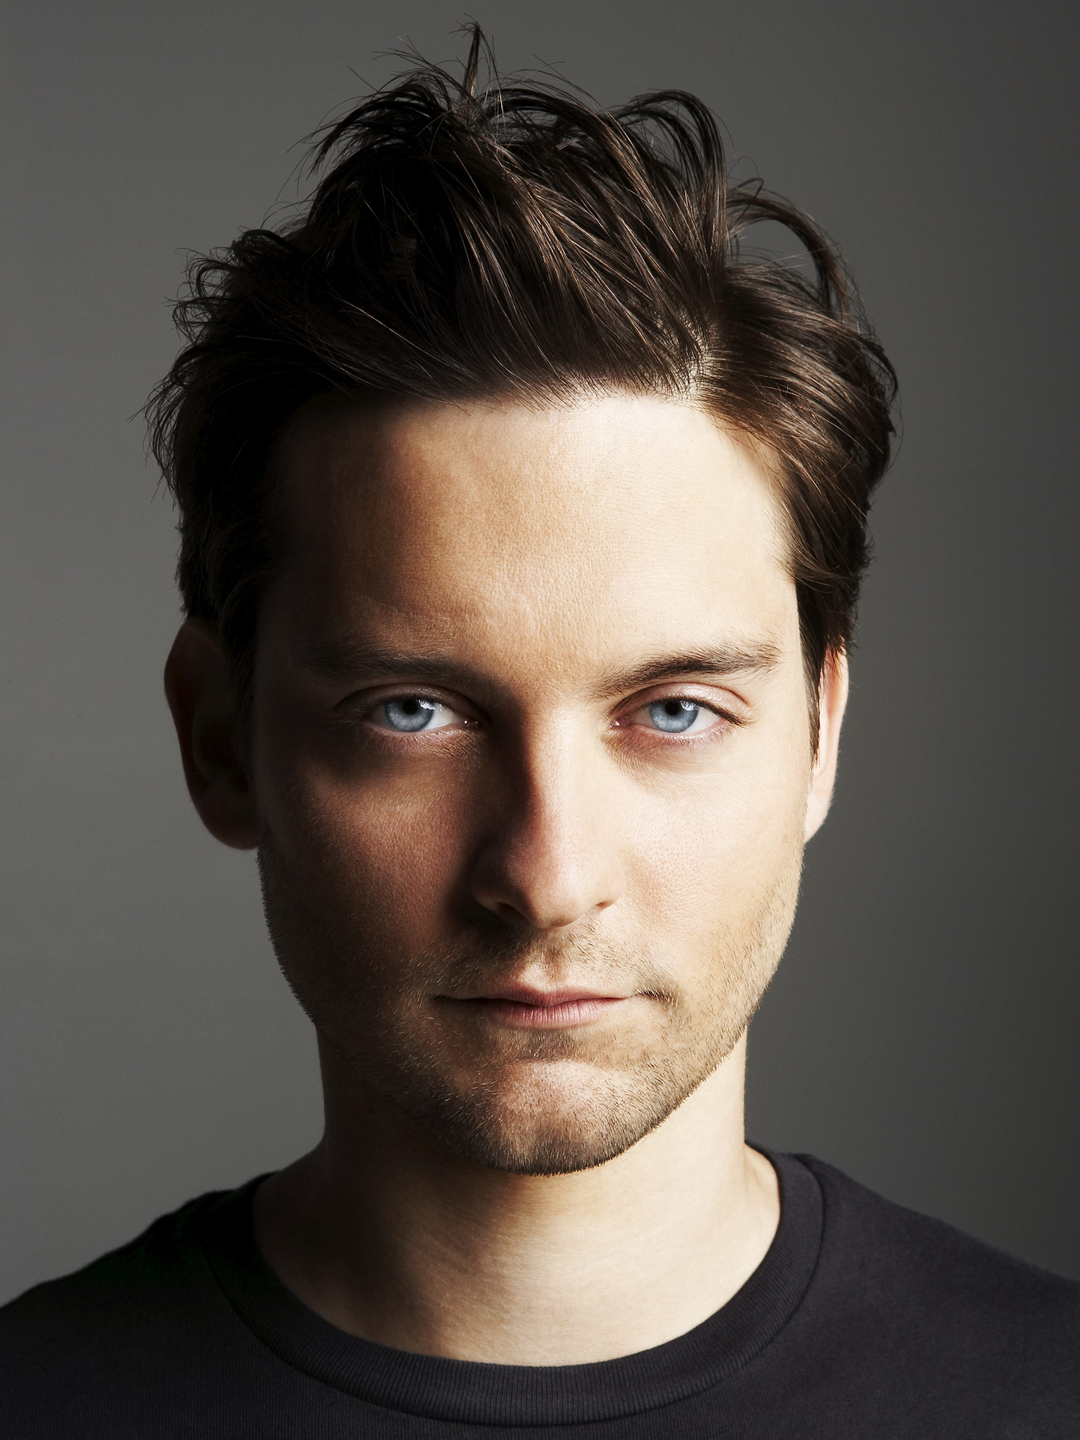 Tobey Maguire biography